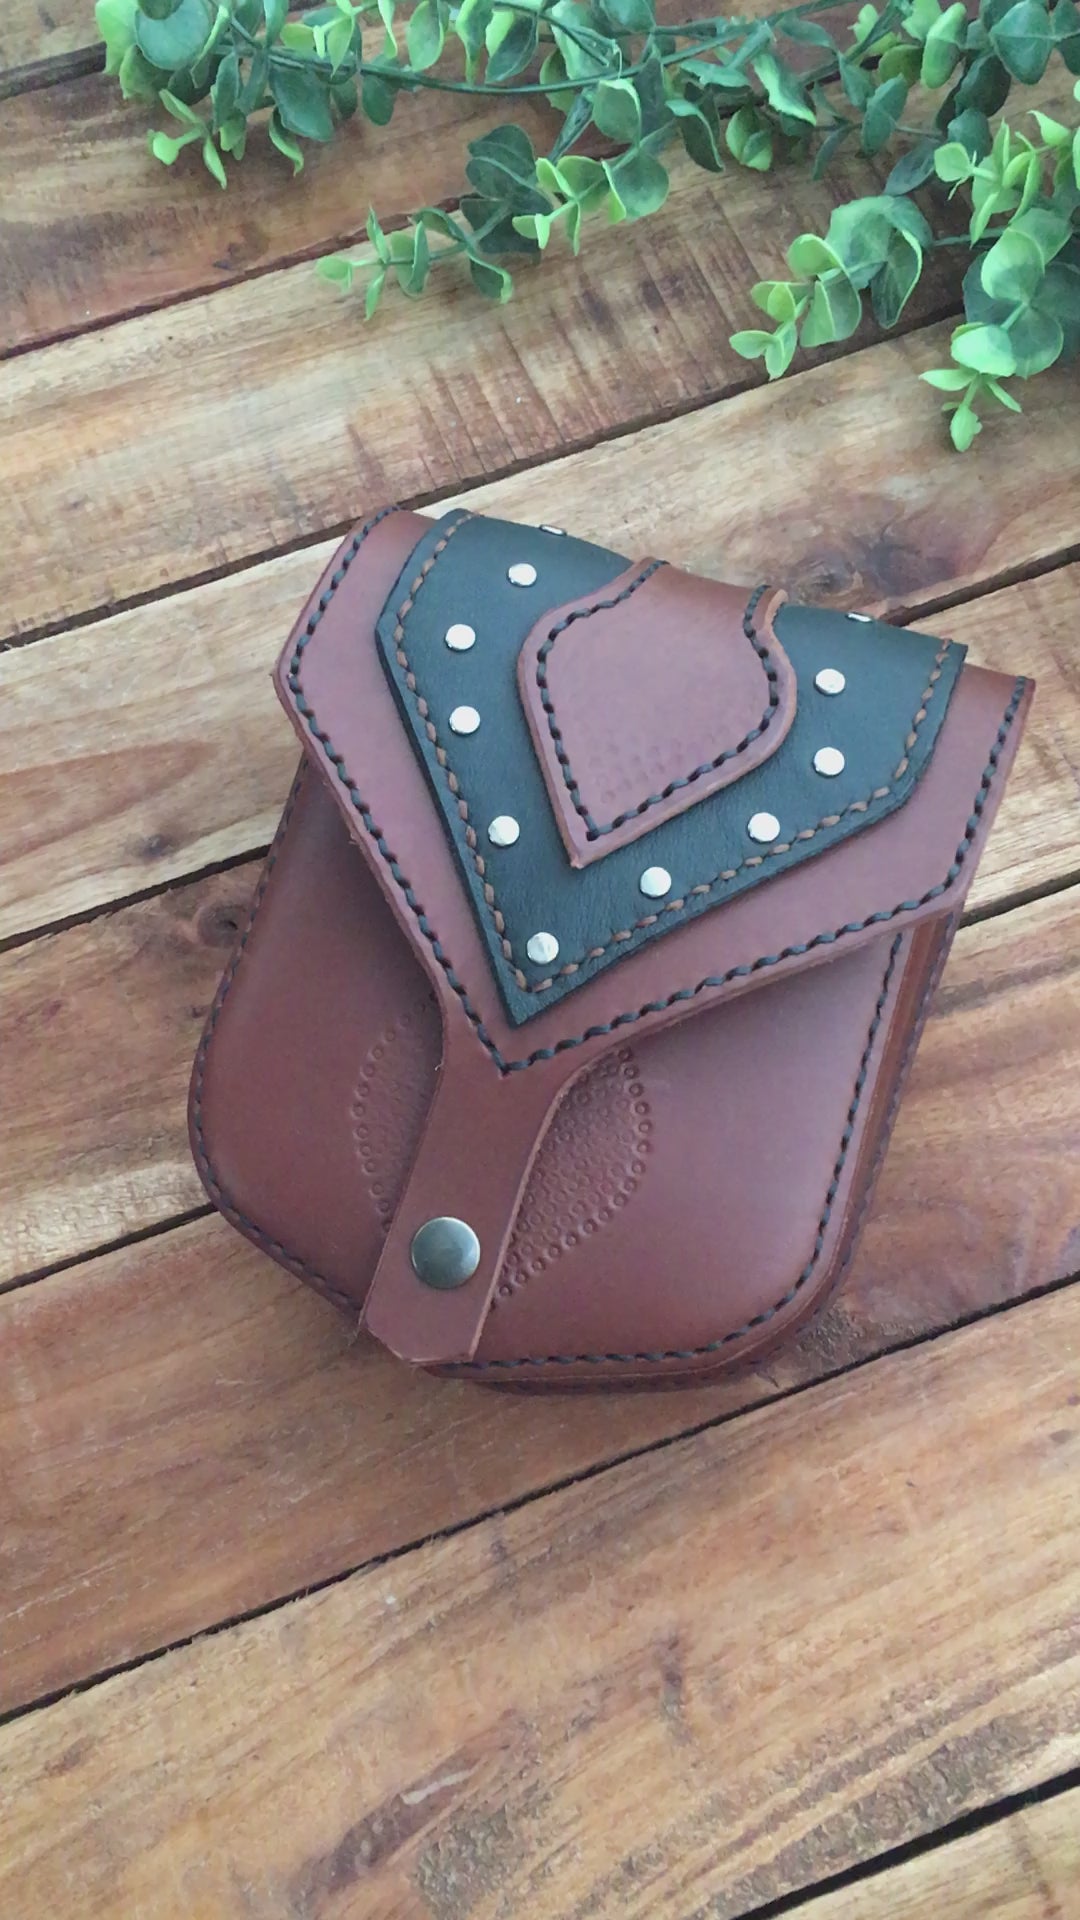 Video showing the Handmade Two-tone Studded Leather Belt Bag in Brown and Black